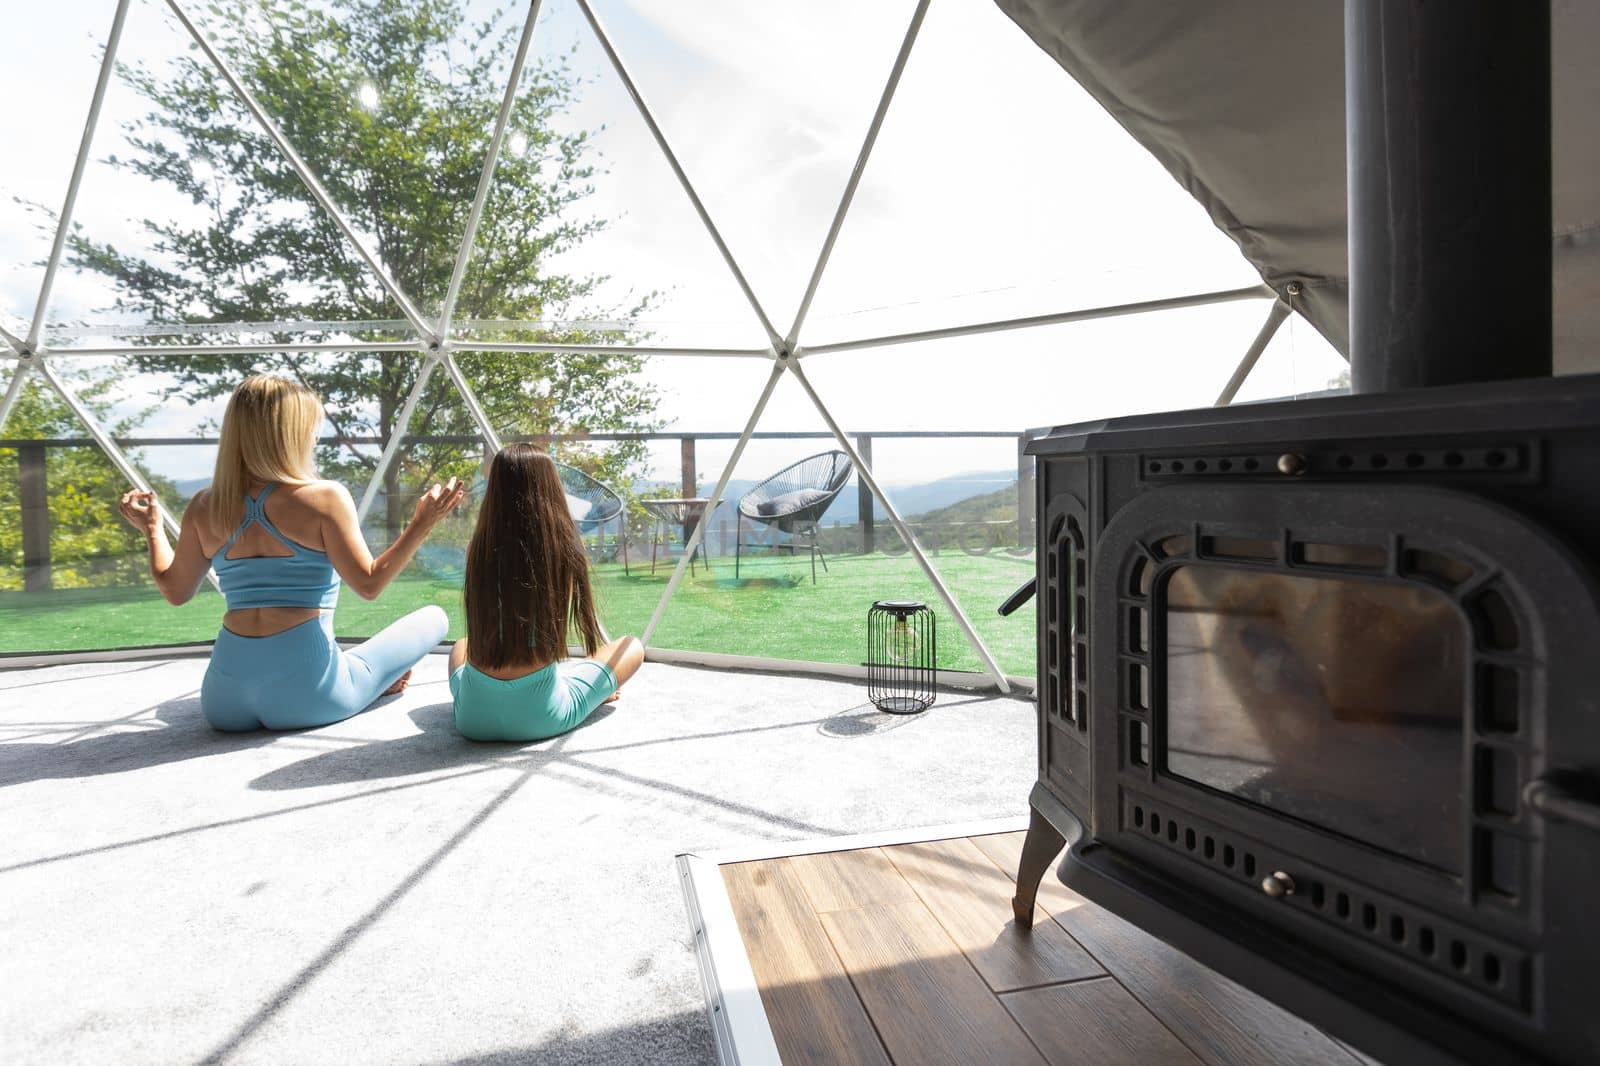 mother and daughter doing yoga and meditation indoor in a glamping dome tent.